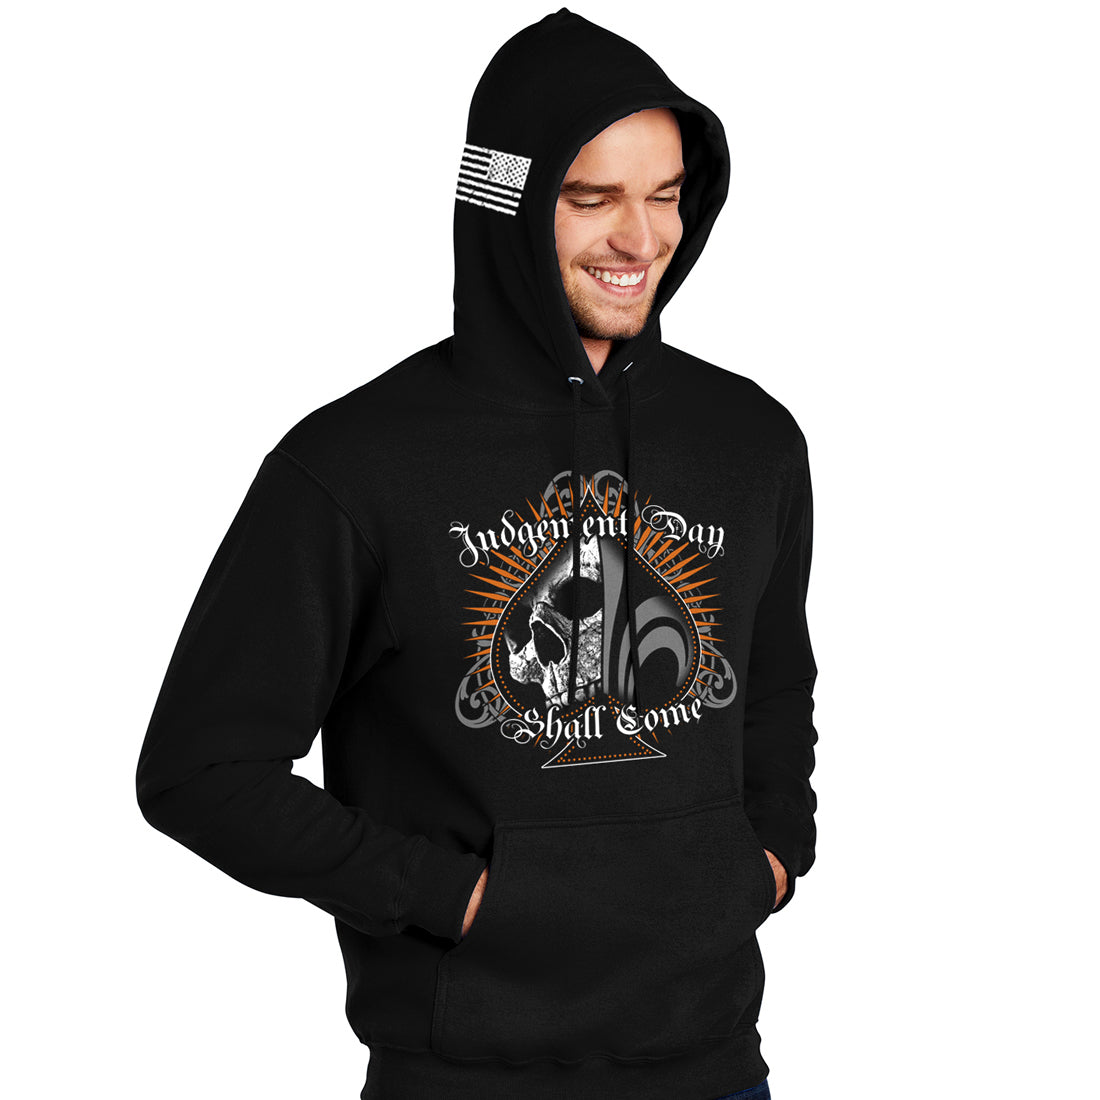 Judgement Day Shall Come / Ace of Spades - Pull Over Hoodie - Black